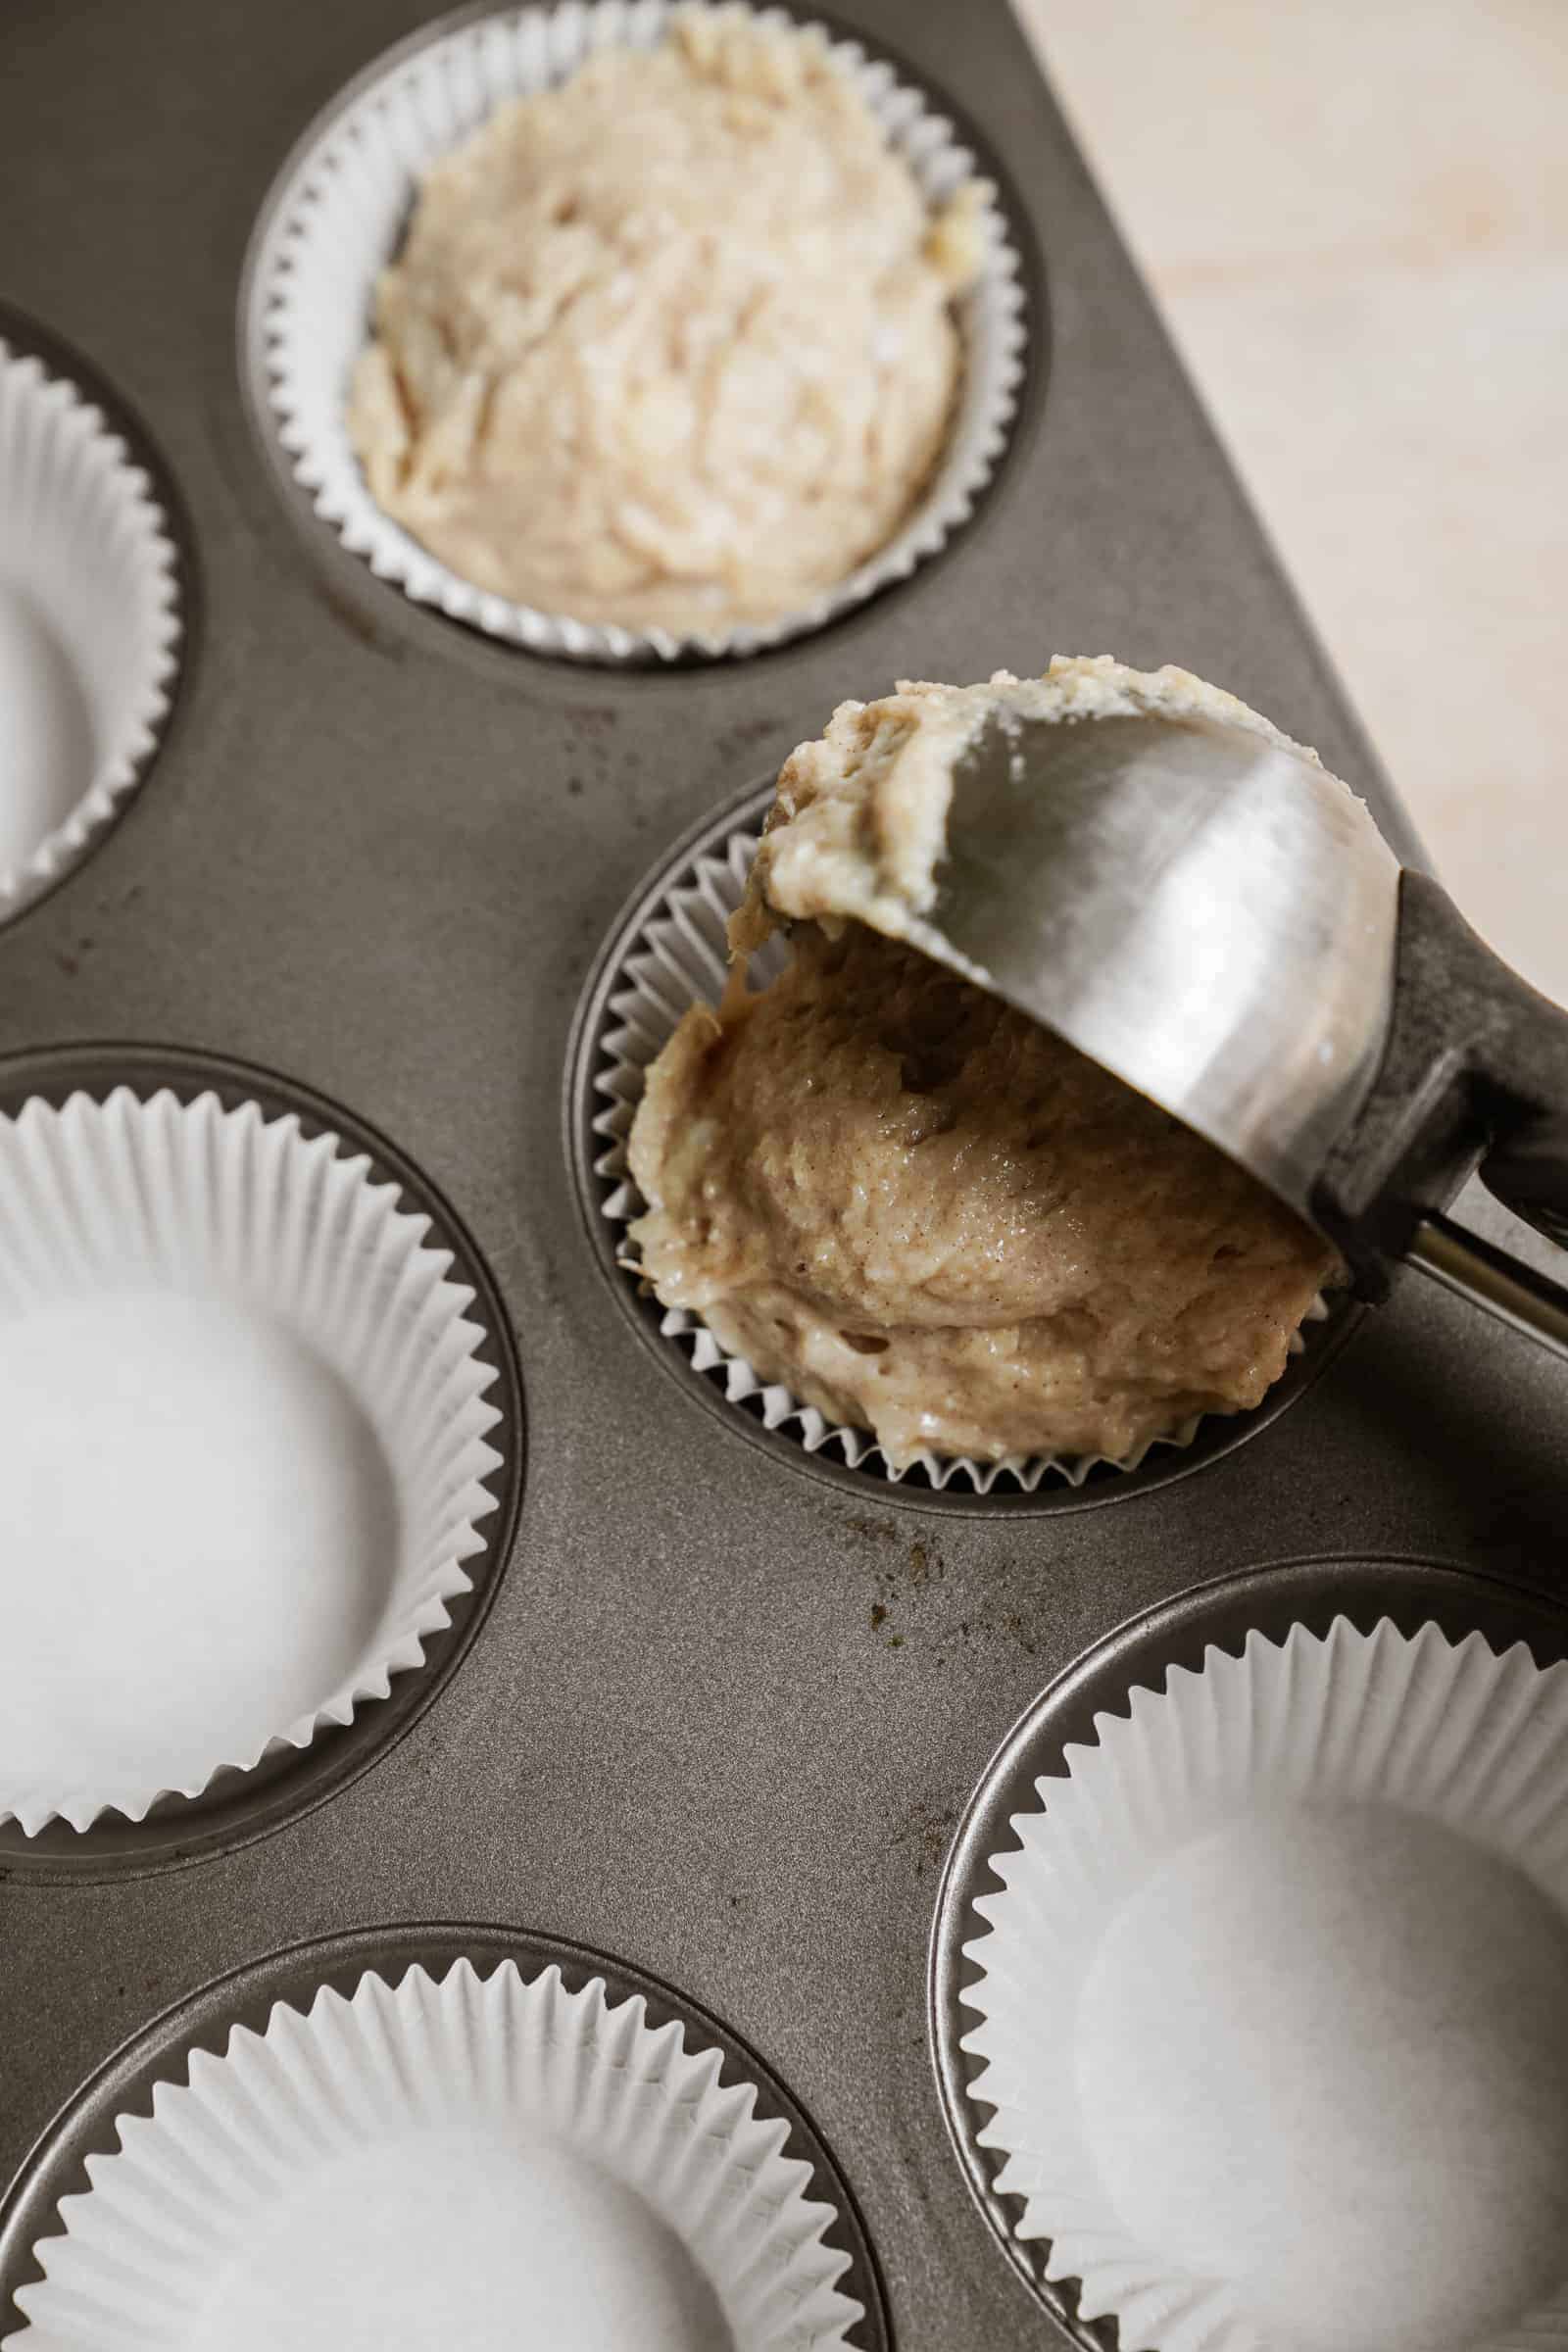 Ice cream scoop putting batter into muffin tin